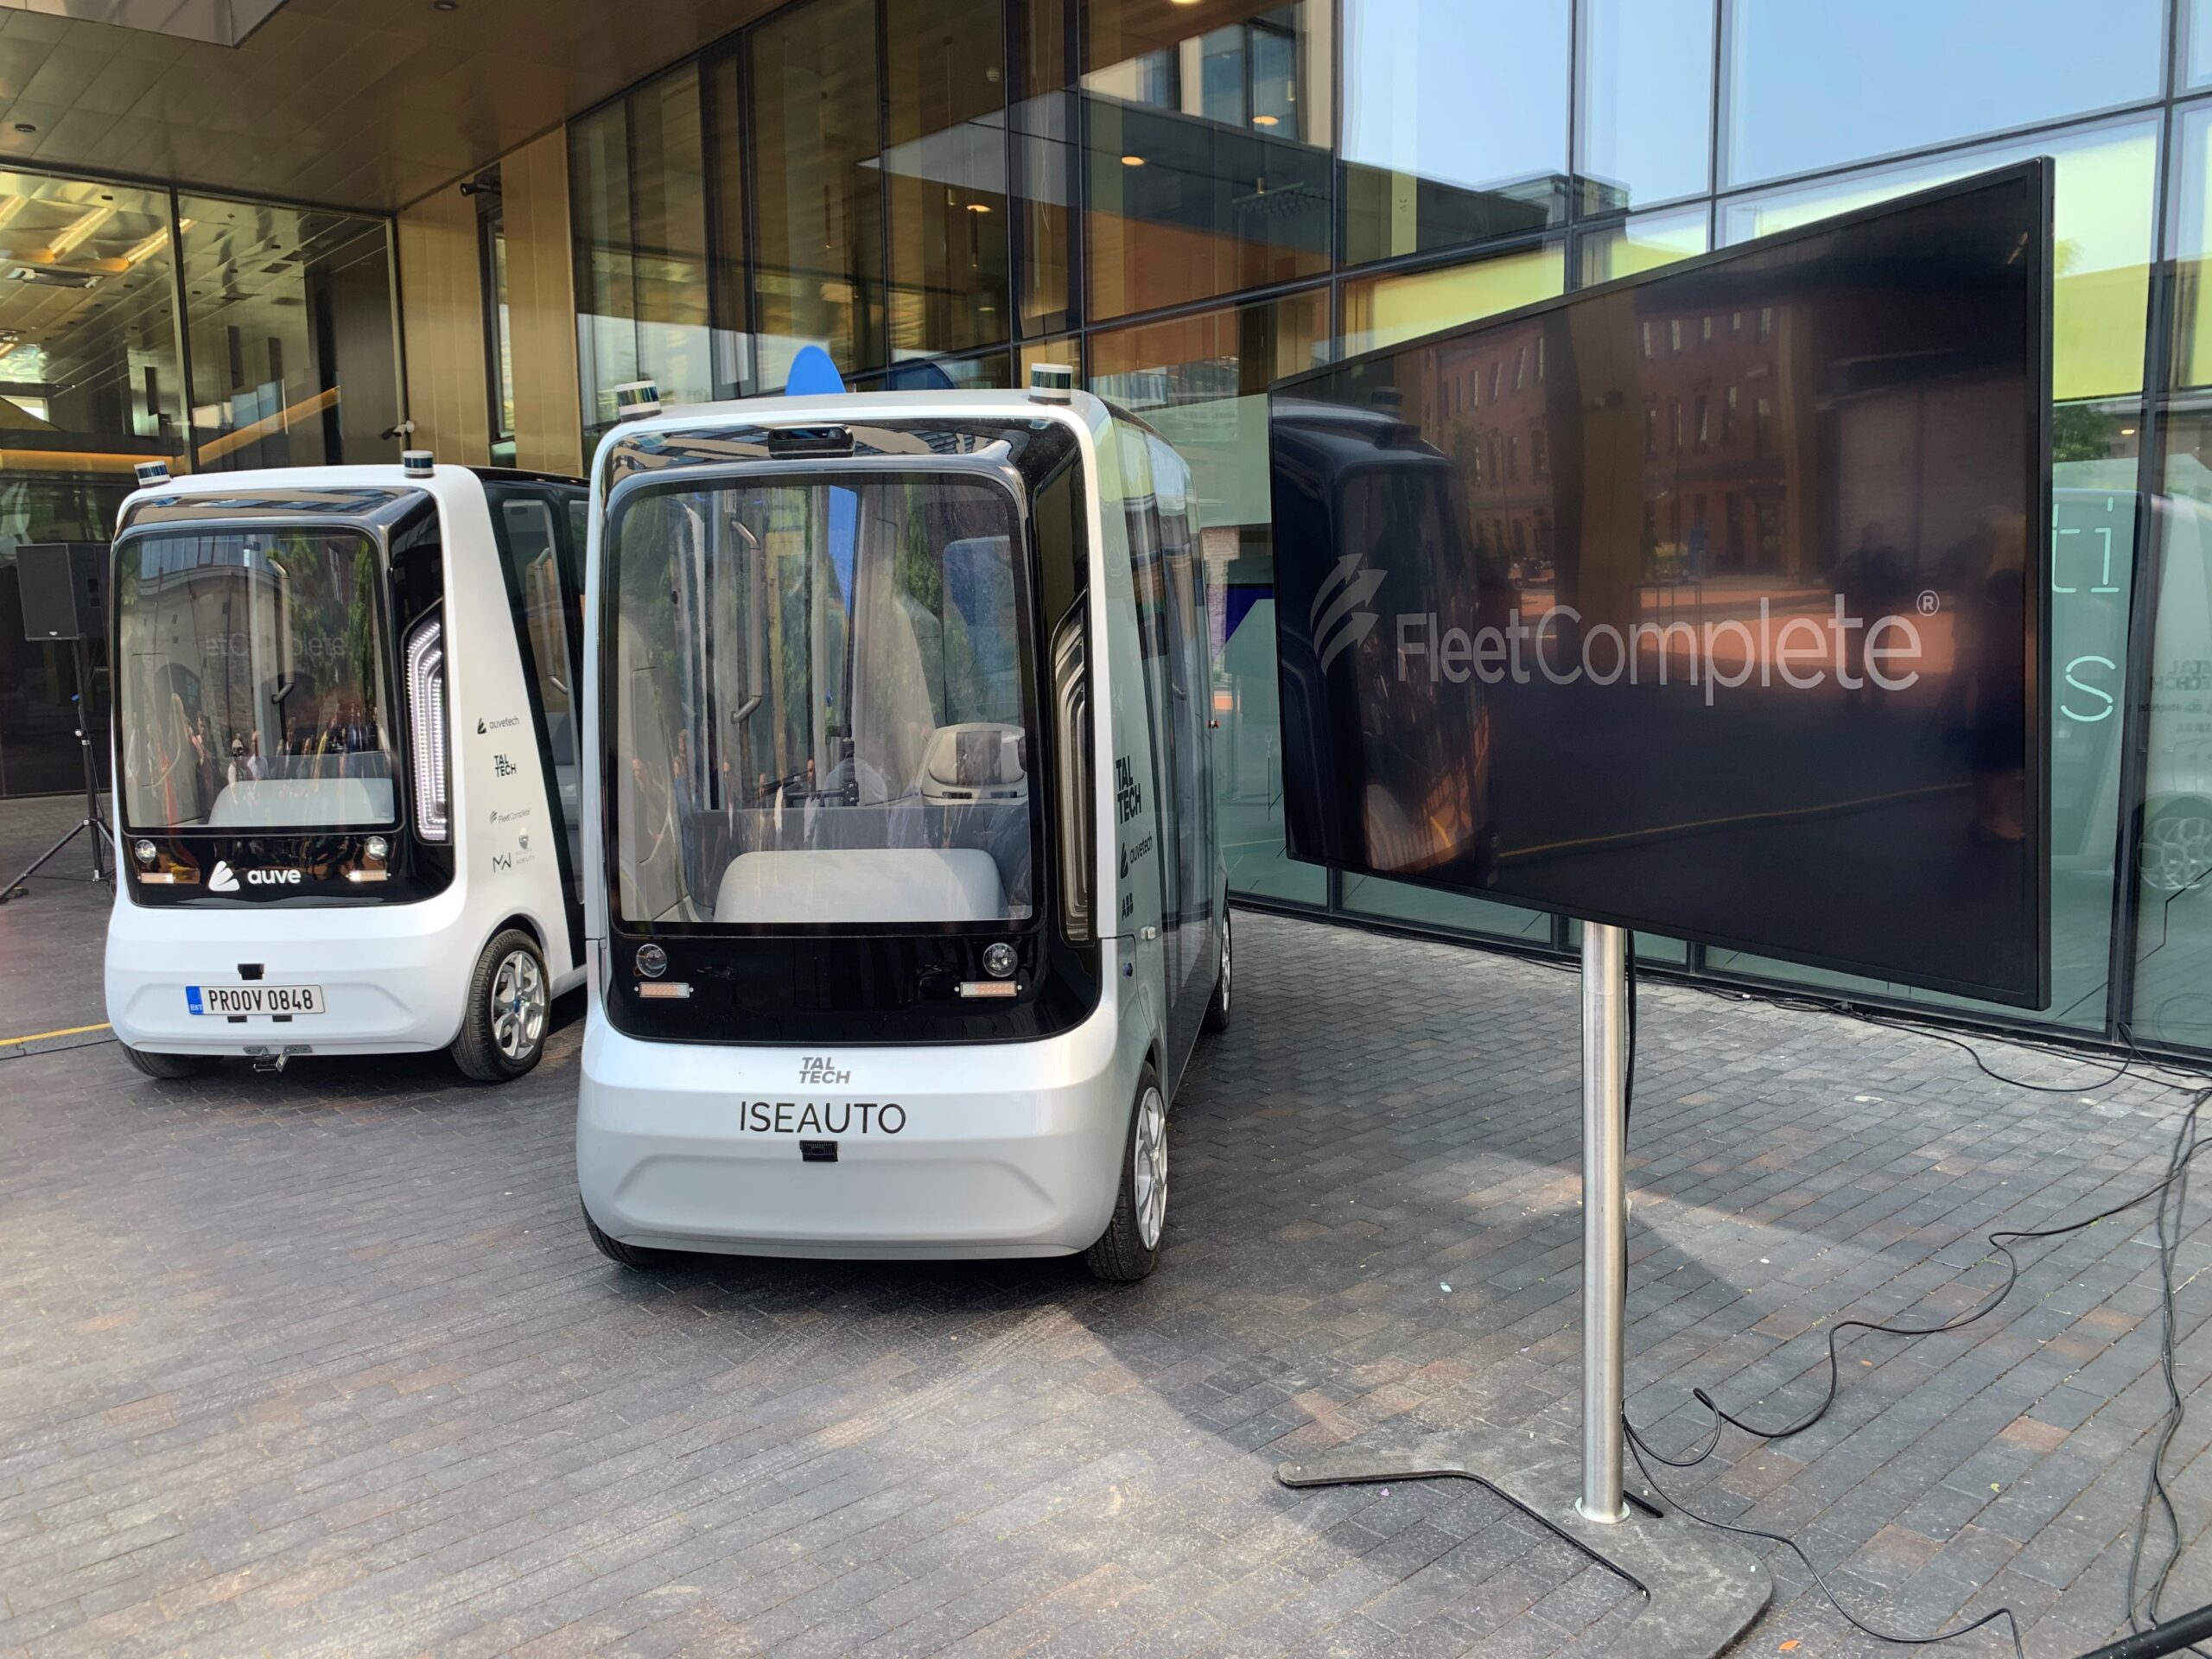 Self-driving bus and Fleet Complete screen display.